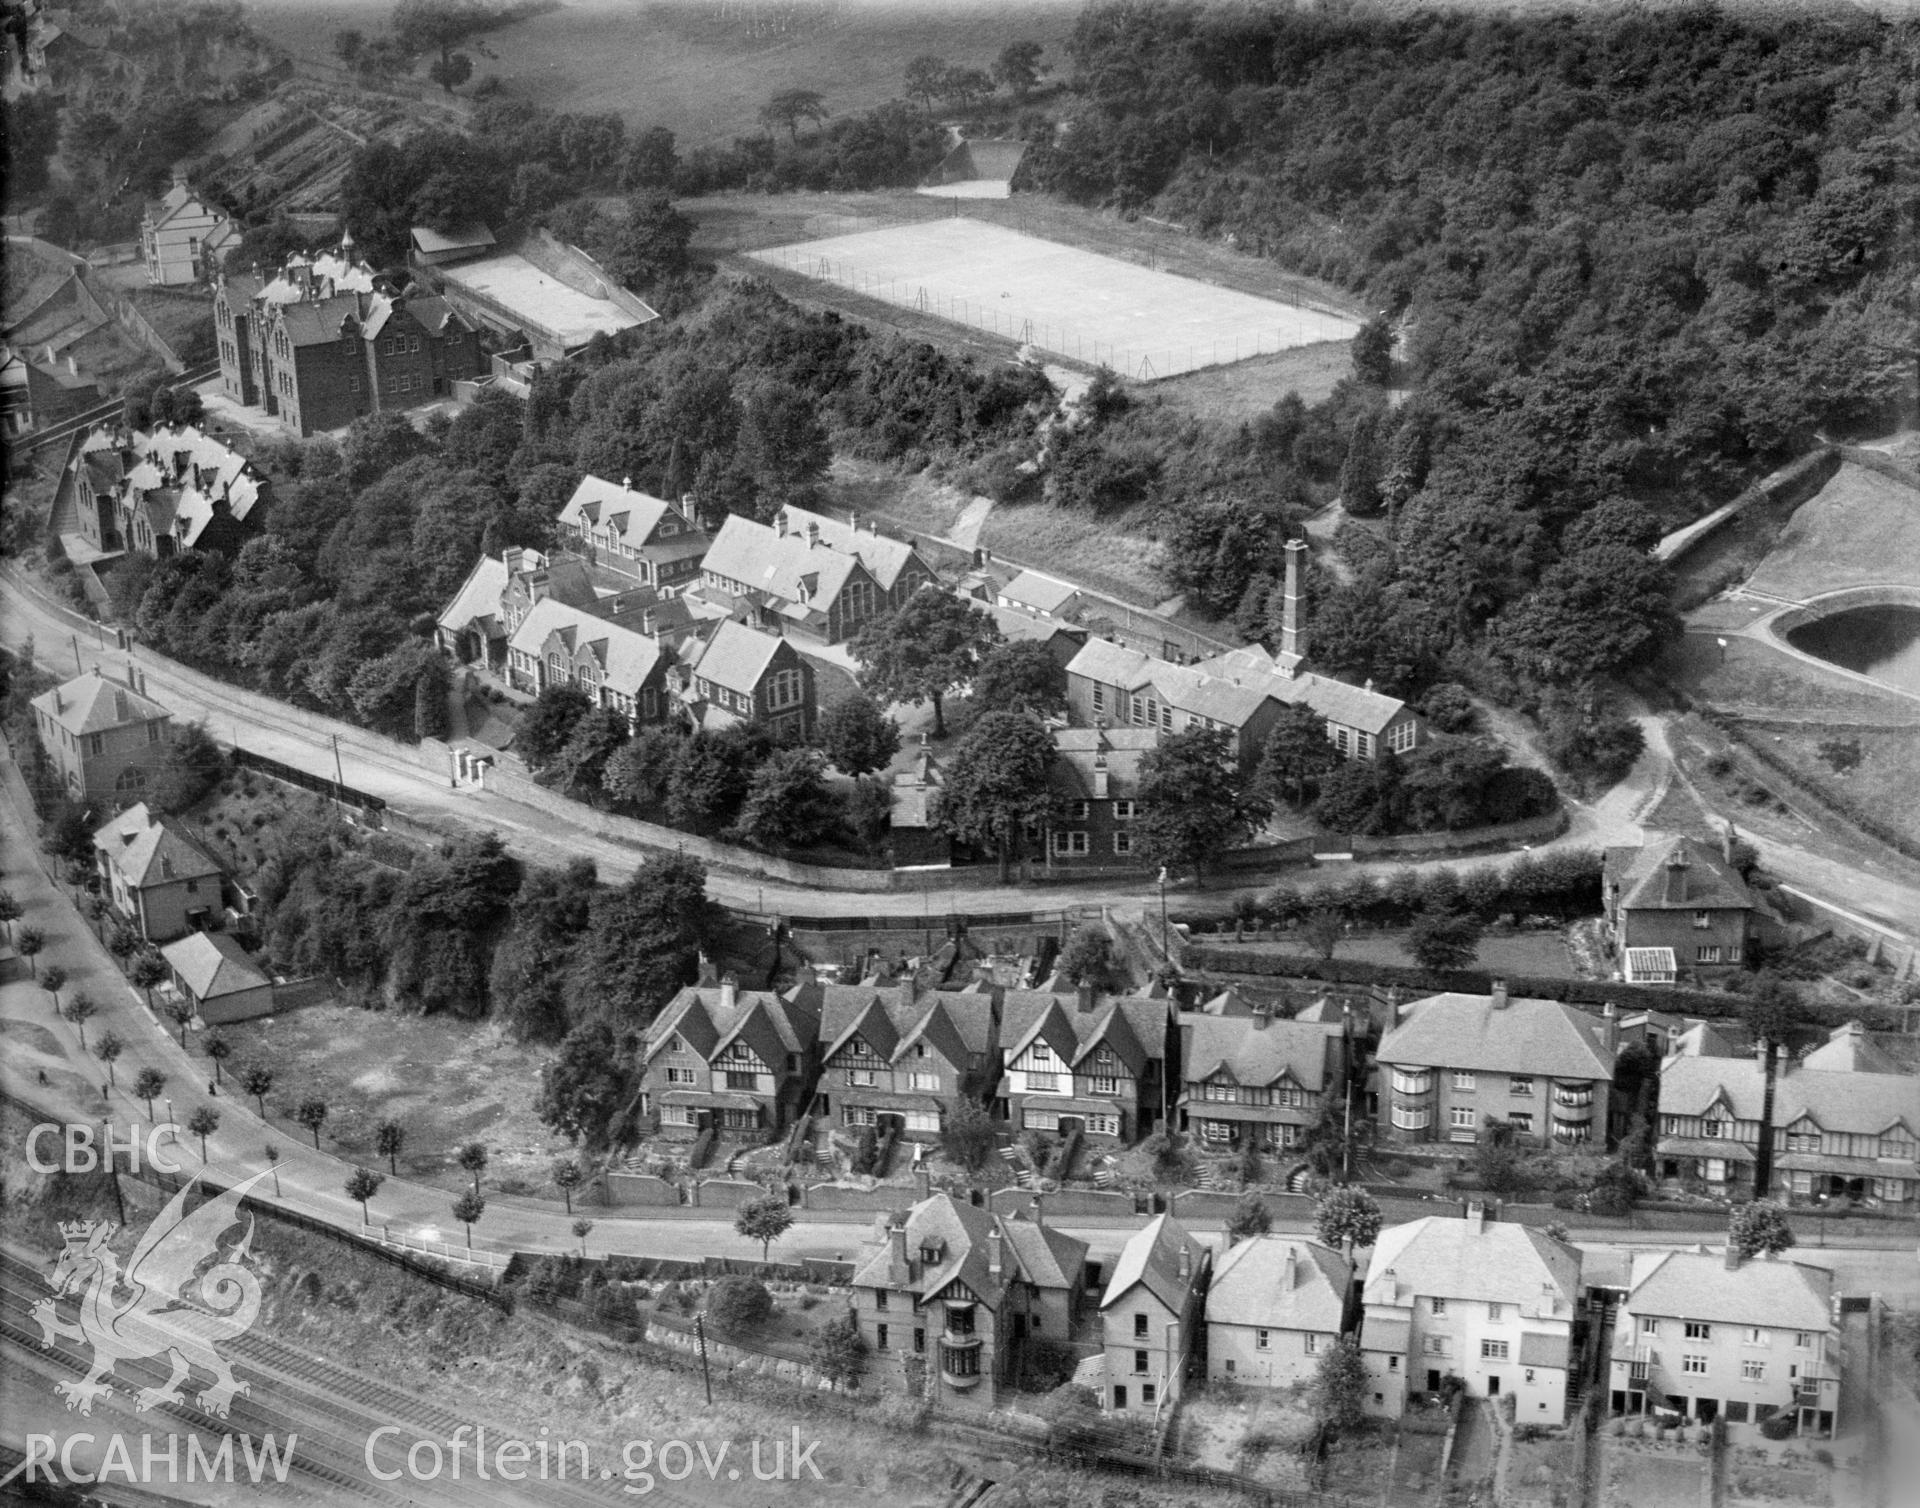 View of Pontypridd showing Grammar school, handball court, tennis courts and Lan Wood reservoir, oblique aerial view. 5?x4? black and white glass plate negative.